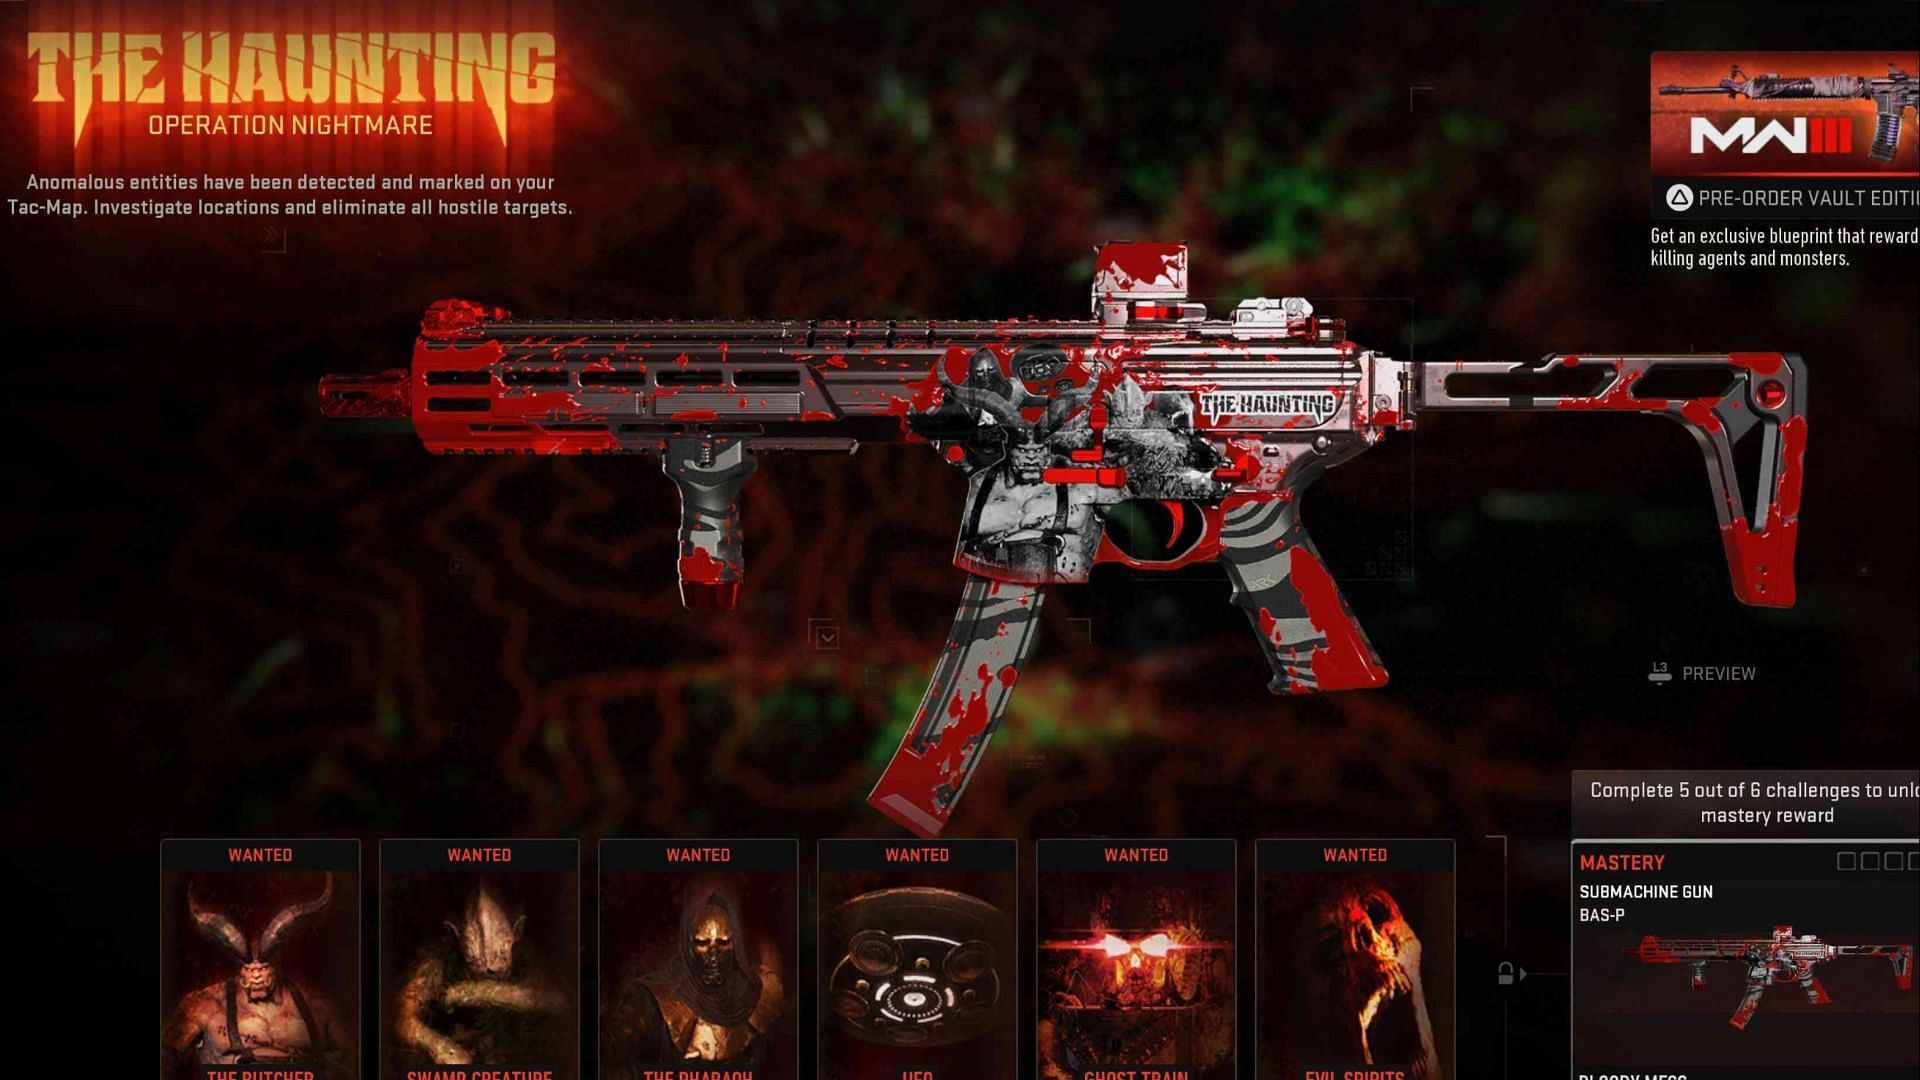 Bloody Mess weapon blueprint for BAS-P SMG reward in WZ2 (Image via Activision)